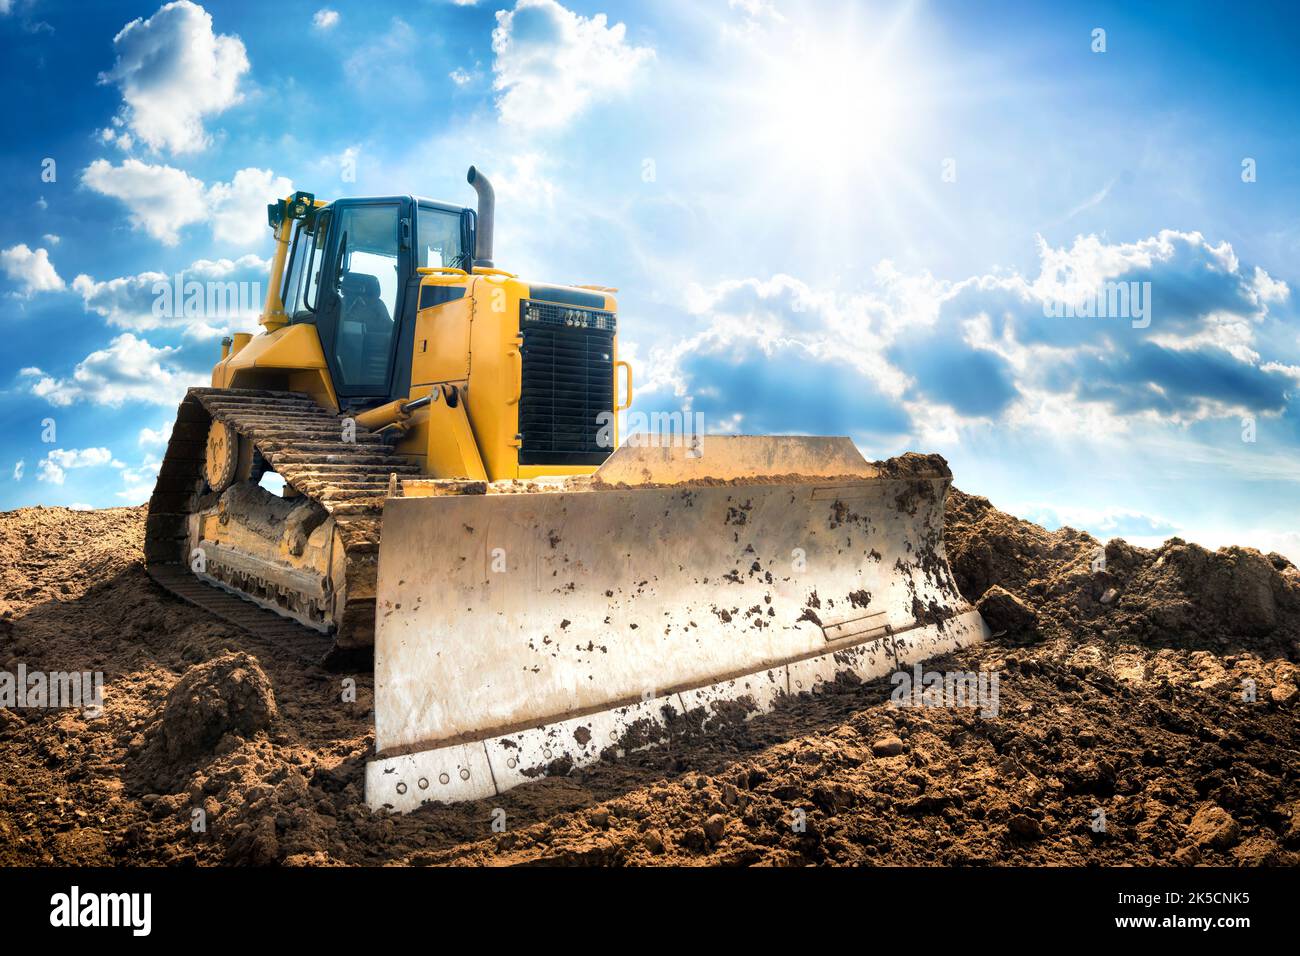 Yellow excavator on dirt, with the bright sun and nice blue sky in the background Stock Photo